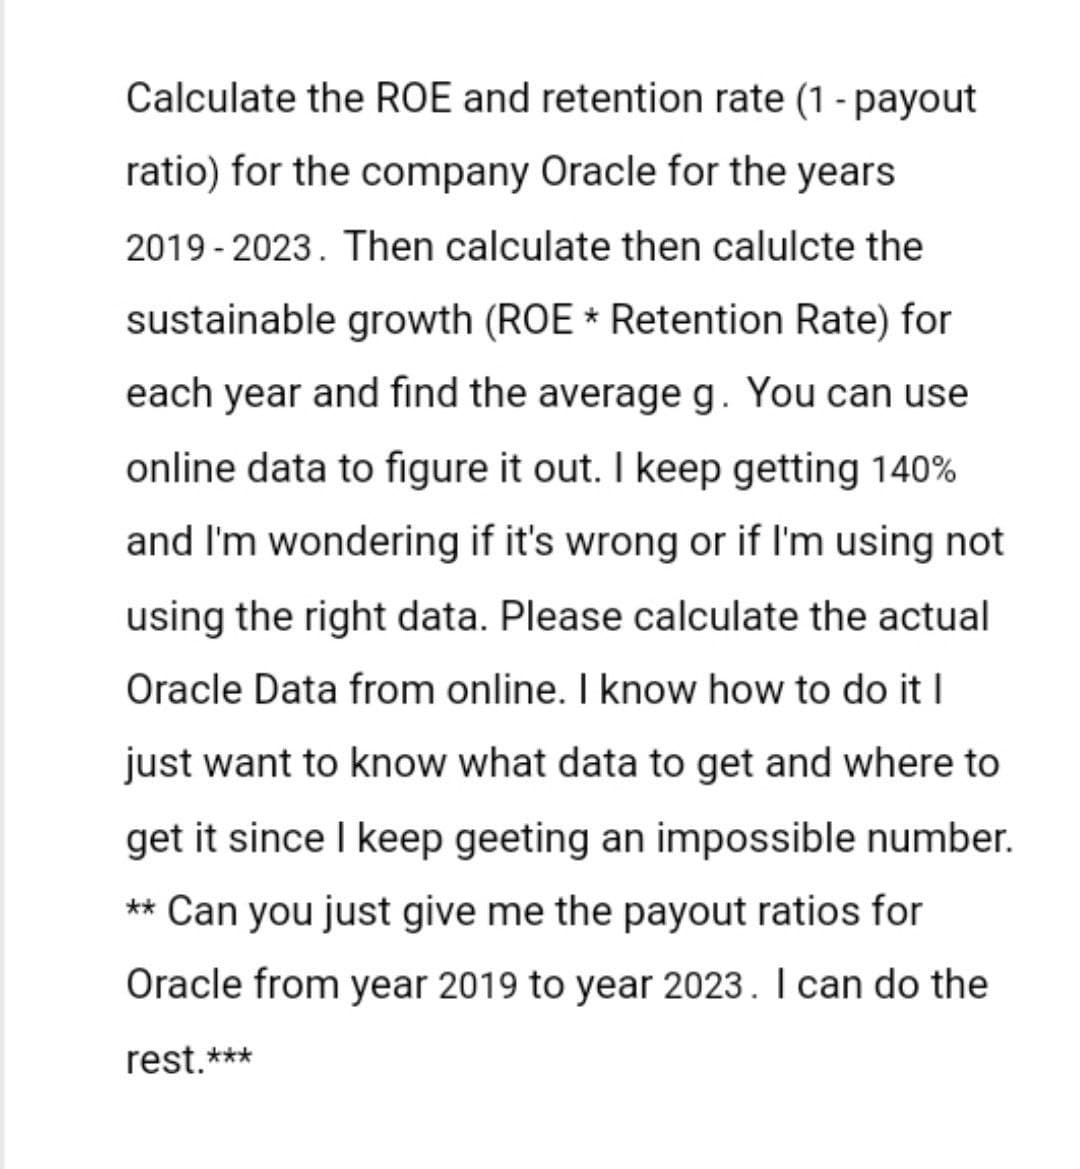 Calculate the ROE and retention rate (1 - payout
ratio) for the company Oracle for the years
2019-2023. Then calculate then calulcte the
sustainable growth (ROE * Retention Rate) for
each year and find the average g. You can use
online data to figure it out. I keep getting 140%
and I'm wondering if it's wrong or if I'm using not
using the right data. Please calculate the actual
Oracle Data from online. I know how to do it I
just want to know what data to get and where to
get it since I keep geeting an impossible number.
** Can you just give me the payout ratios for
Oracle from year 2019 to year 2023. I can do the
rest.***